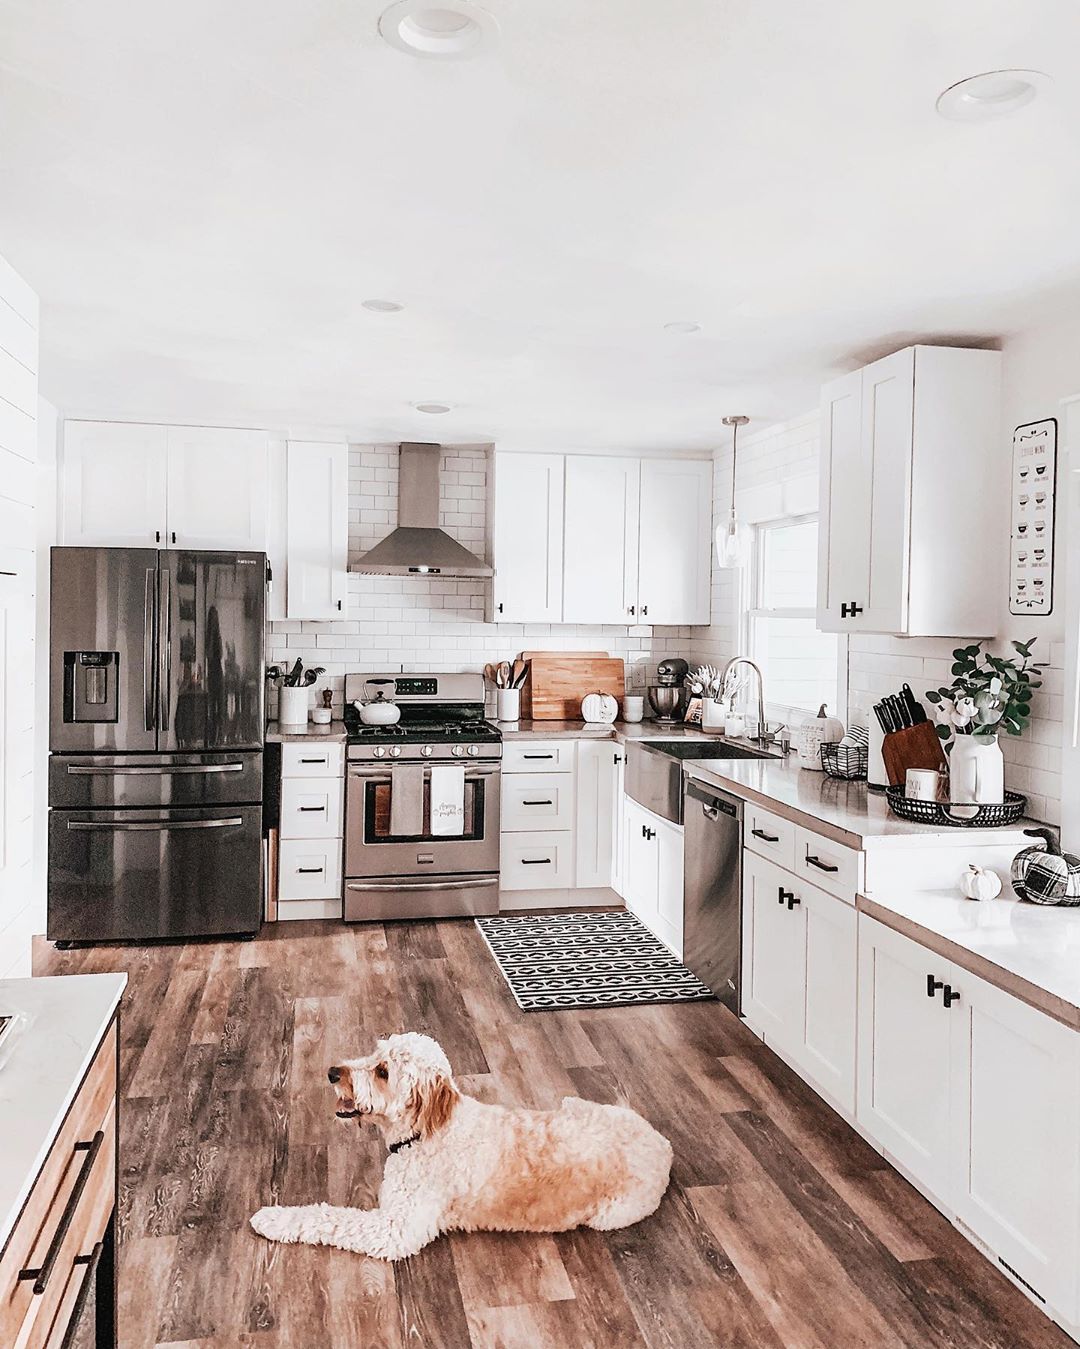 Large Kitchen Area with New Appliances. Photo by Instagram user @fashionablykay